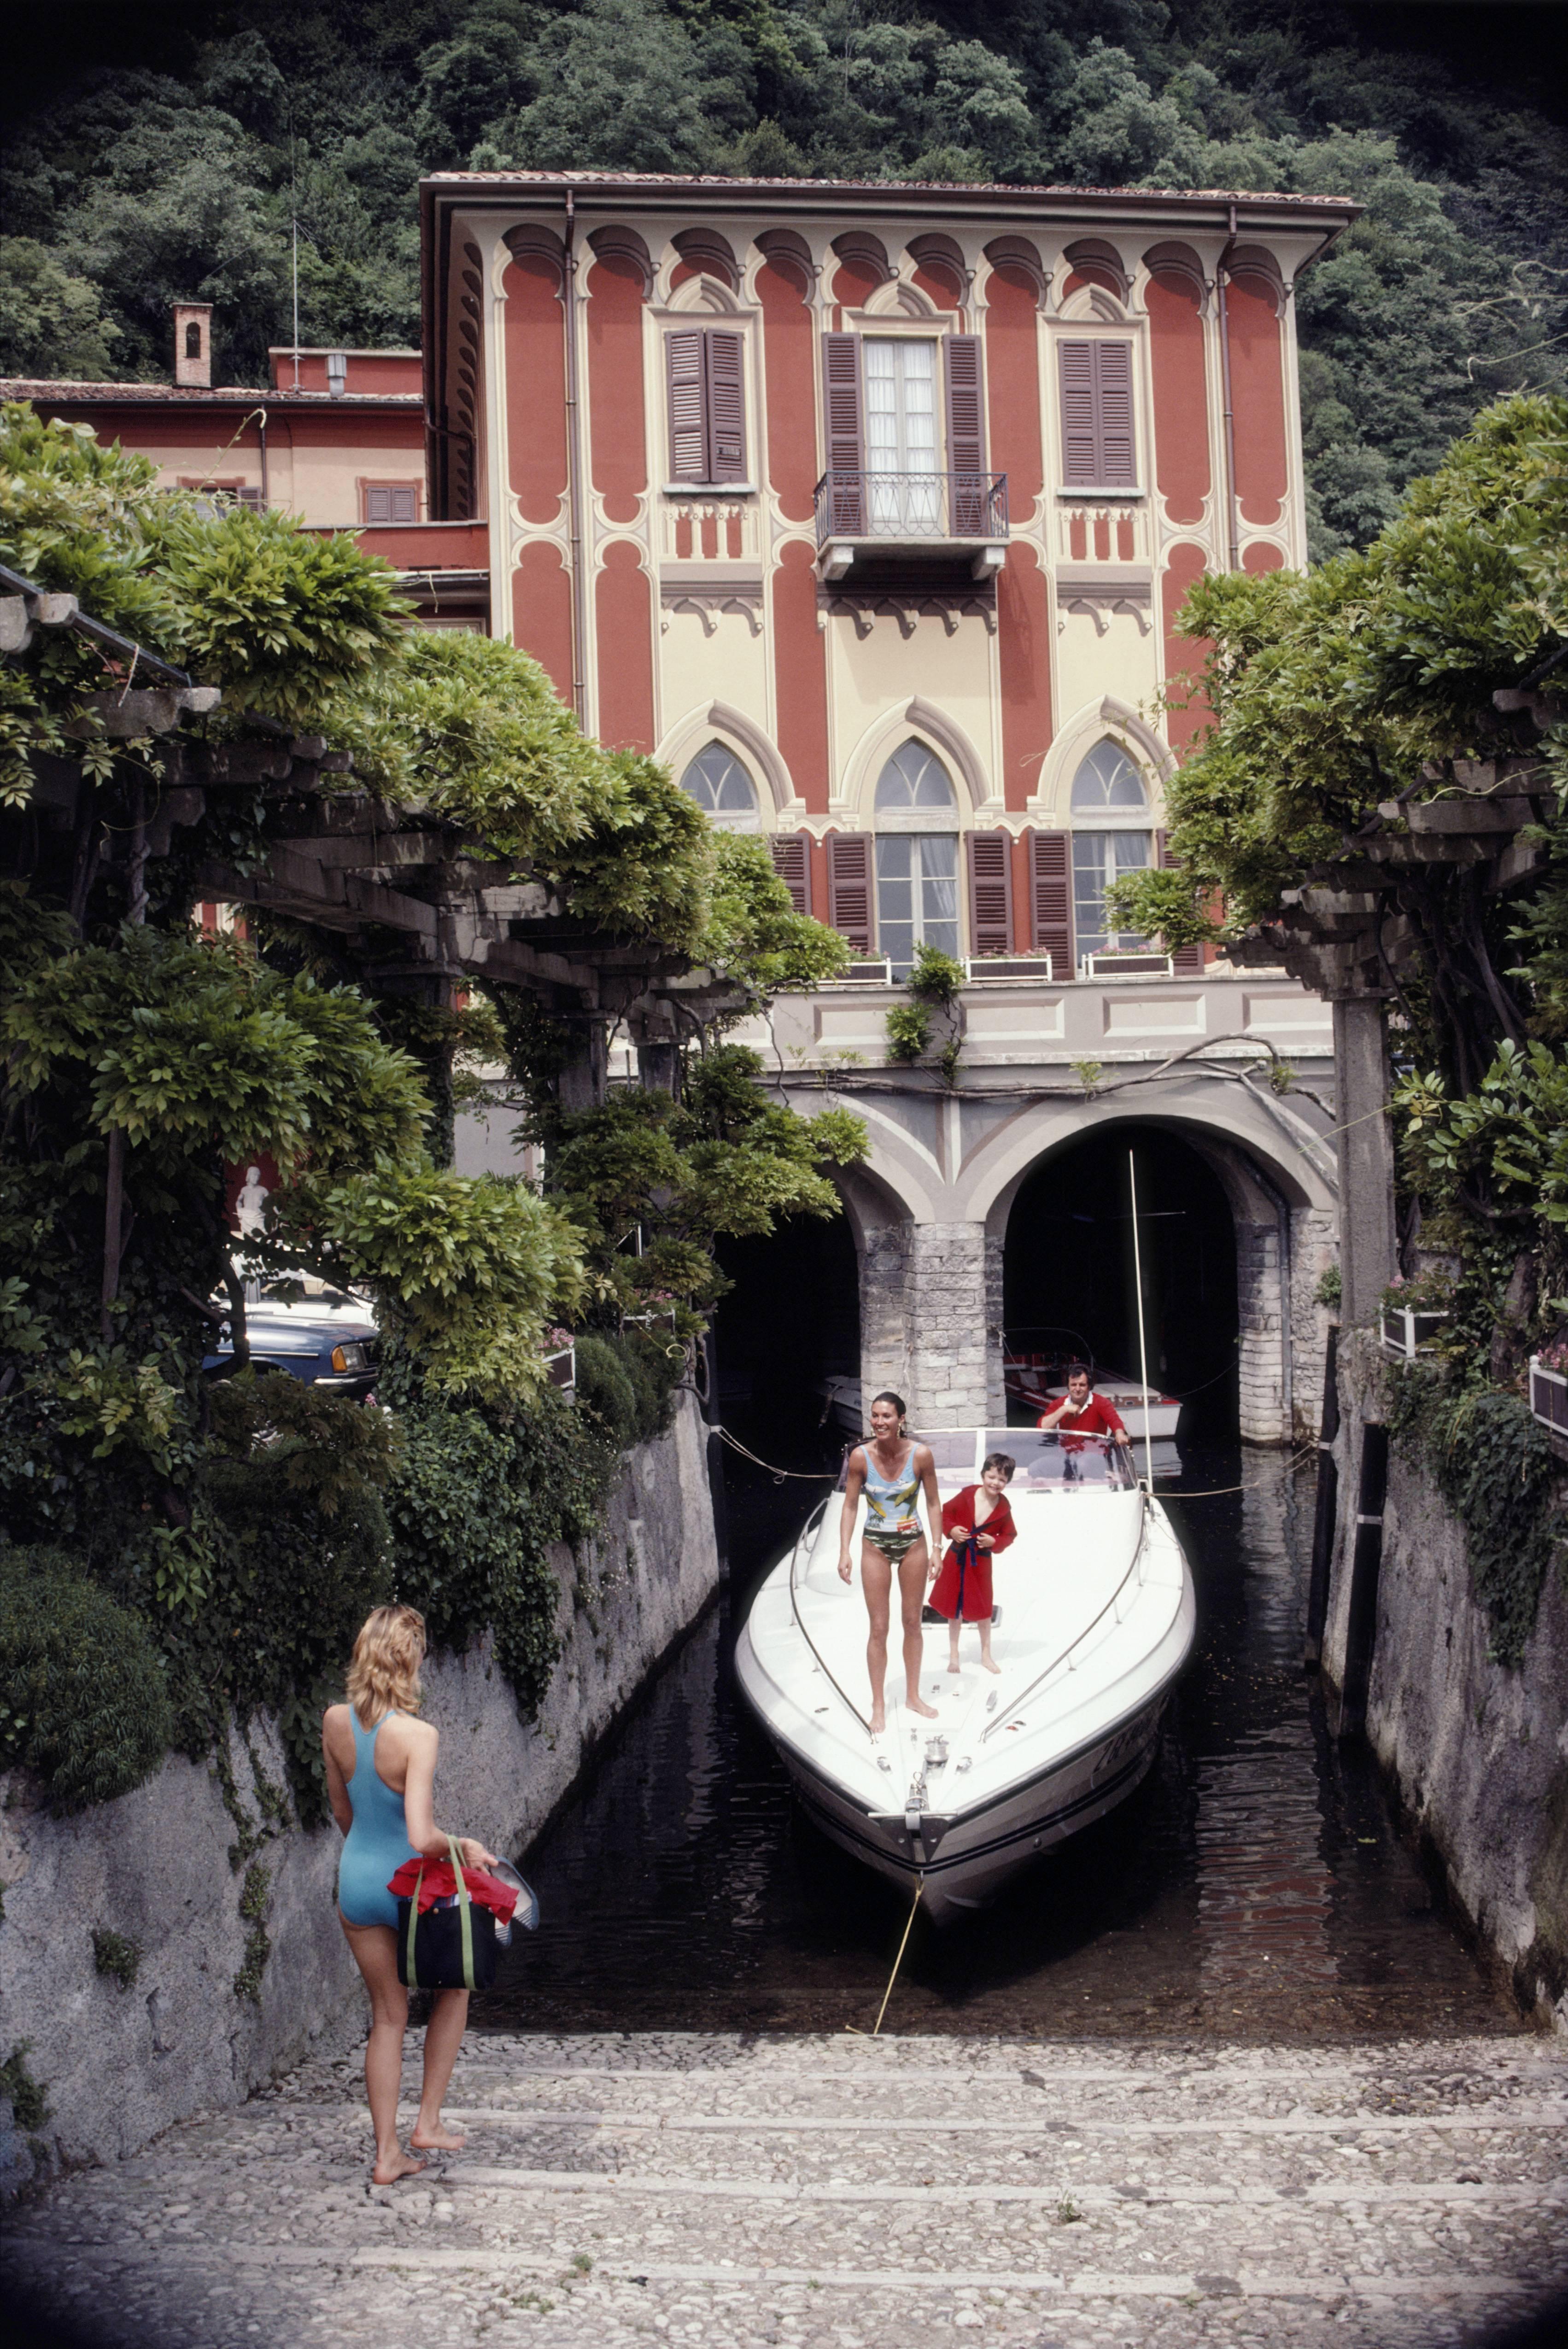 Tullio Abbate, of Abbate Boats, at the back of yacht as it is moored at a property on the shores of Lake Como, Italy, in June 1983. (Photo by Slim Aarons/Getty Images)

C-type print from the original transparency held at the Getty Images Archive,